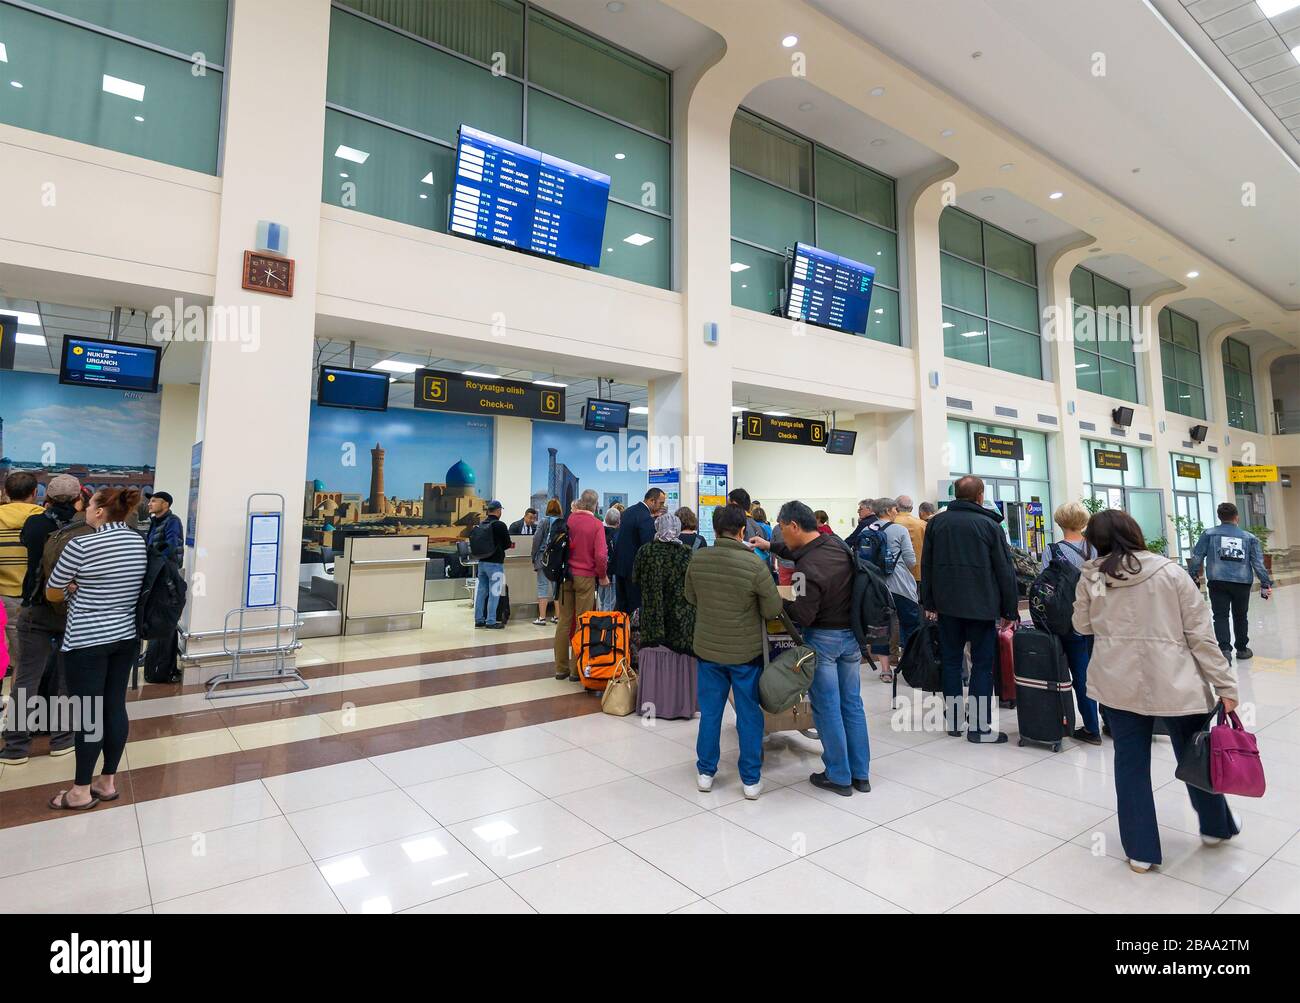 Domestic terminal check-in desks with passengers lined up in the interior of Islam Karimov Tashkent International Airport in Uzbekistan. Stock Photo